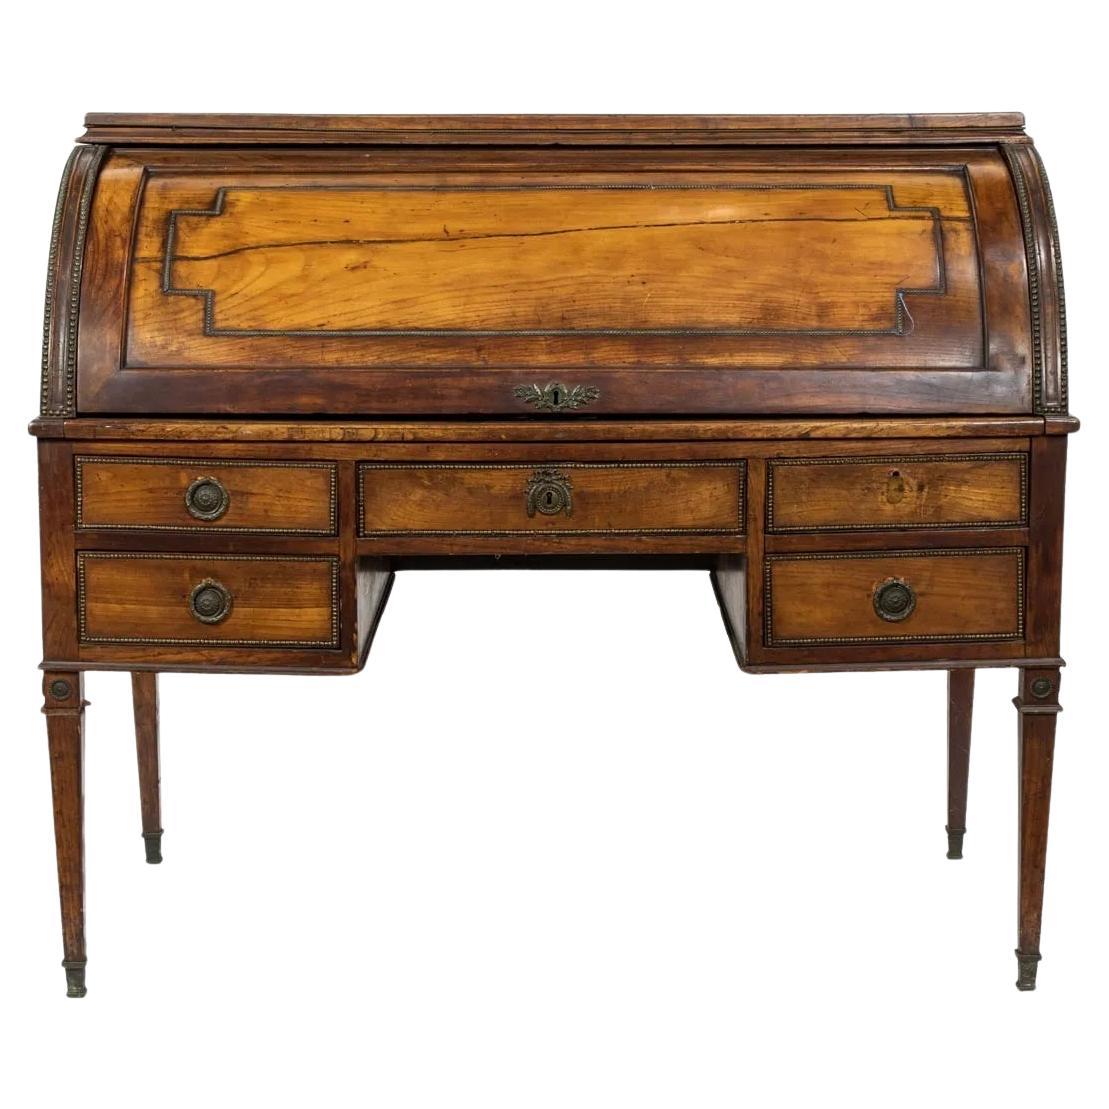 Antique French Louis XVI Cylinder Desk - Late 18th Century (AF5-002)